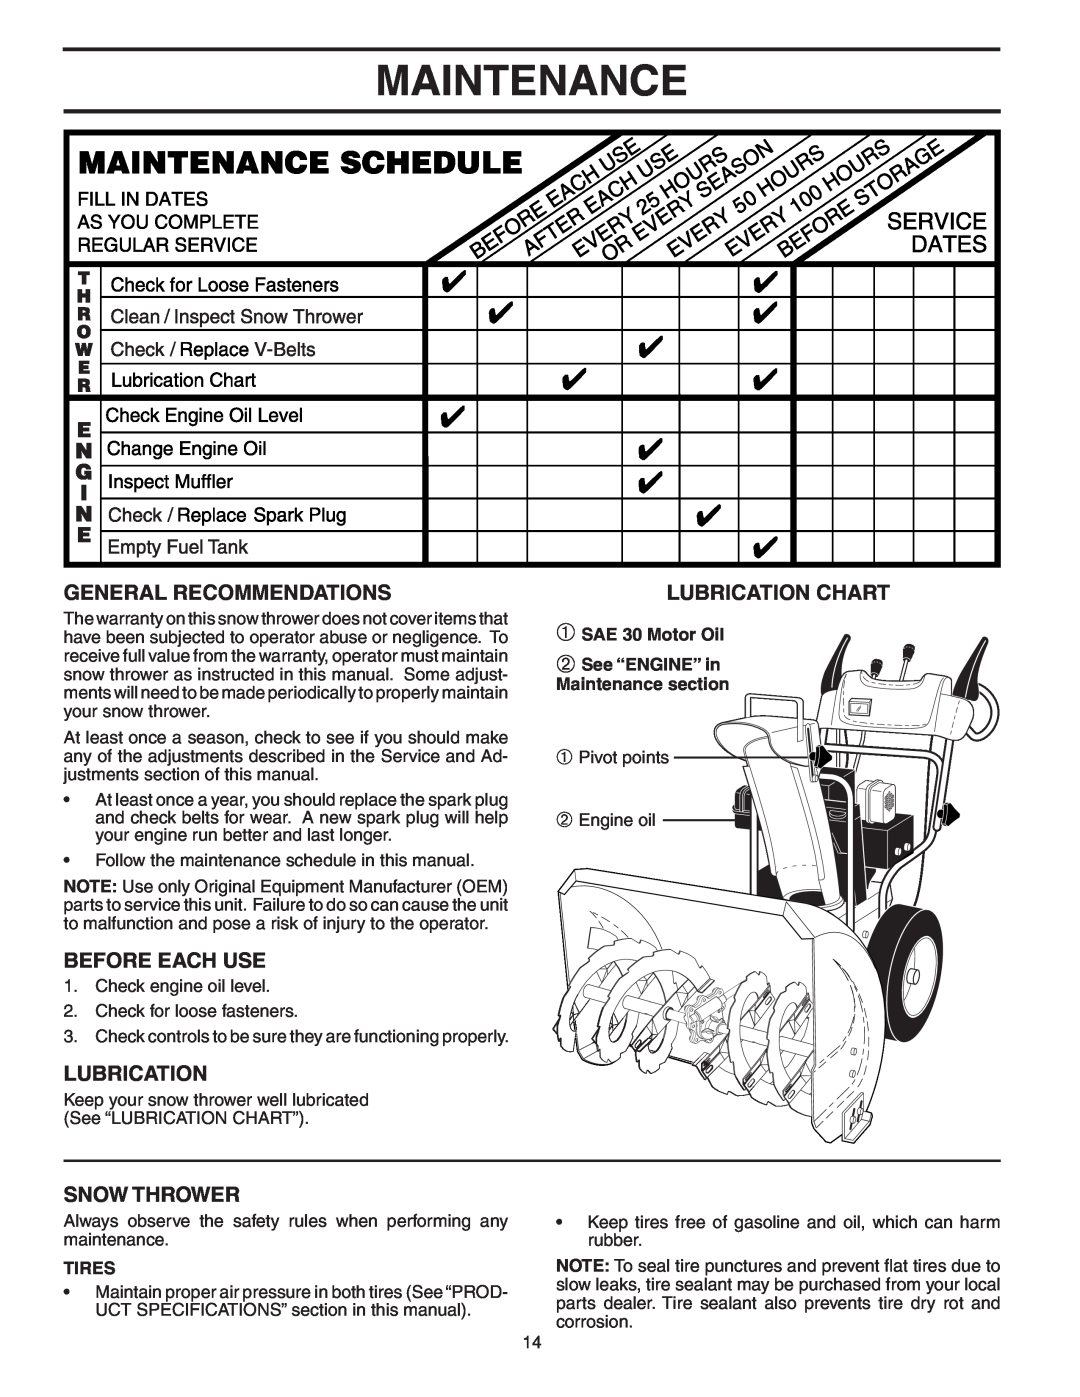 Poulan 187881 Maintenance, General Recommendations, Before Each Use, Snow Thrower, Lubrication Chart, Tires 